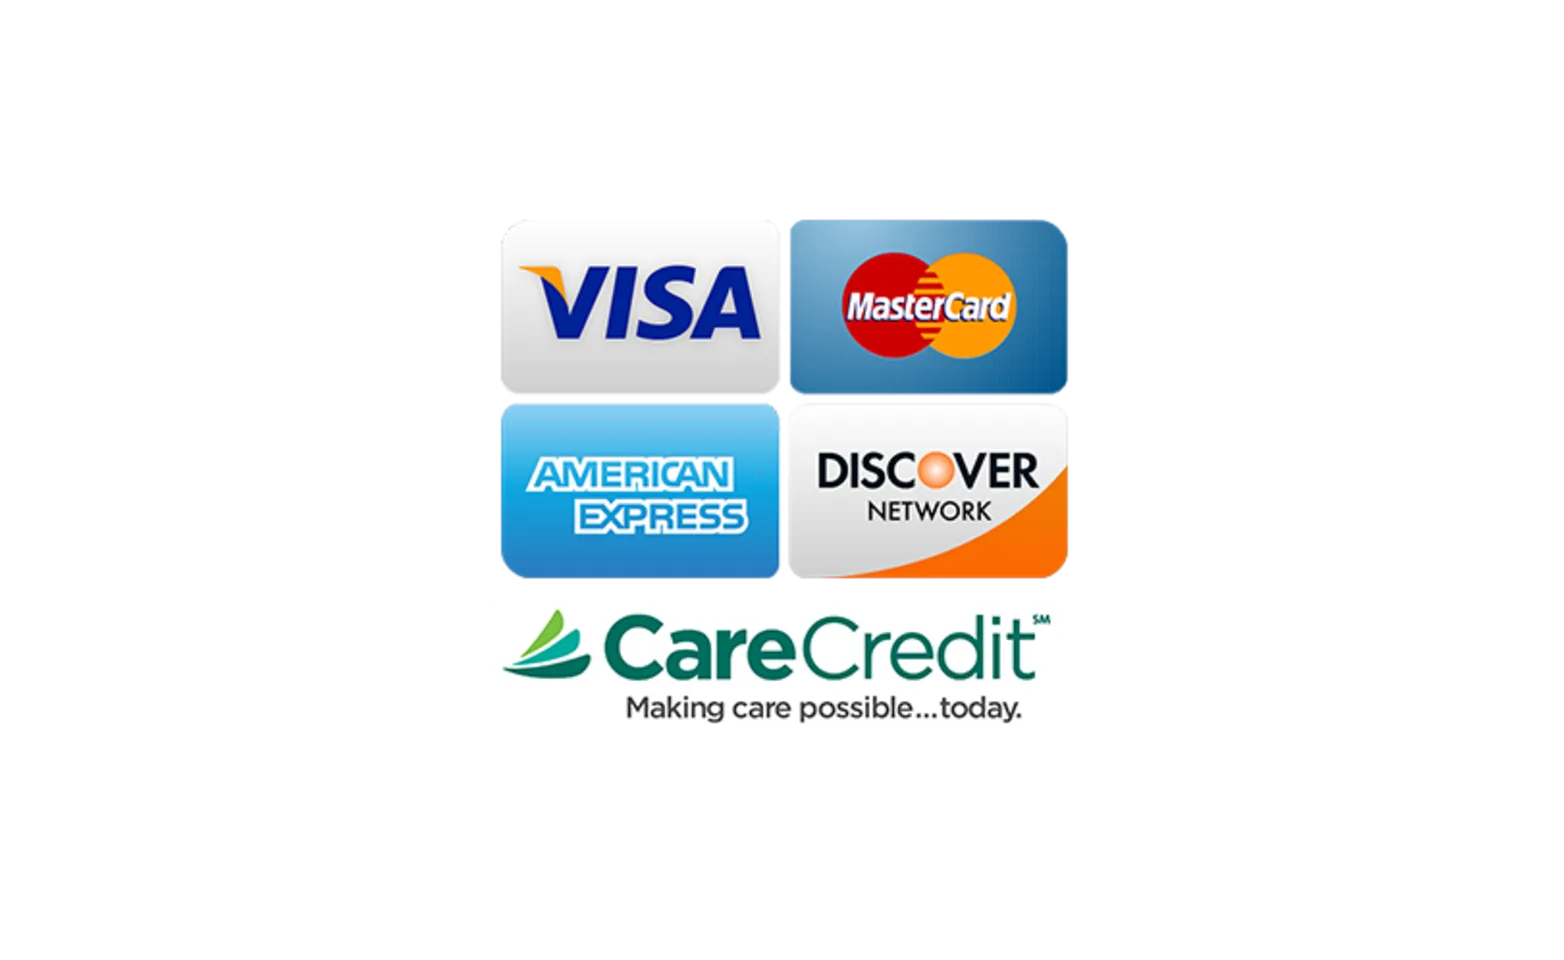 Logos of credit card options and CareCredit